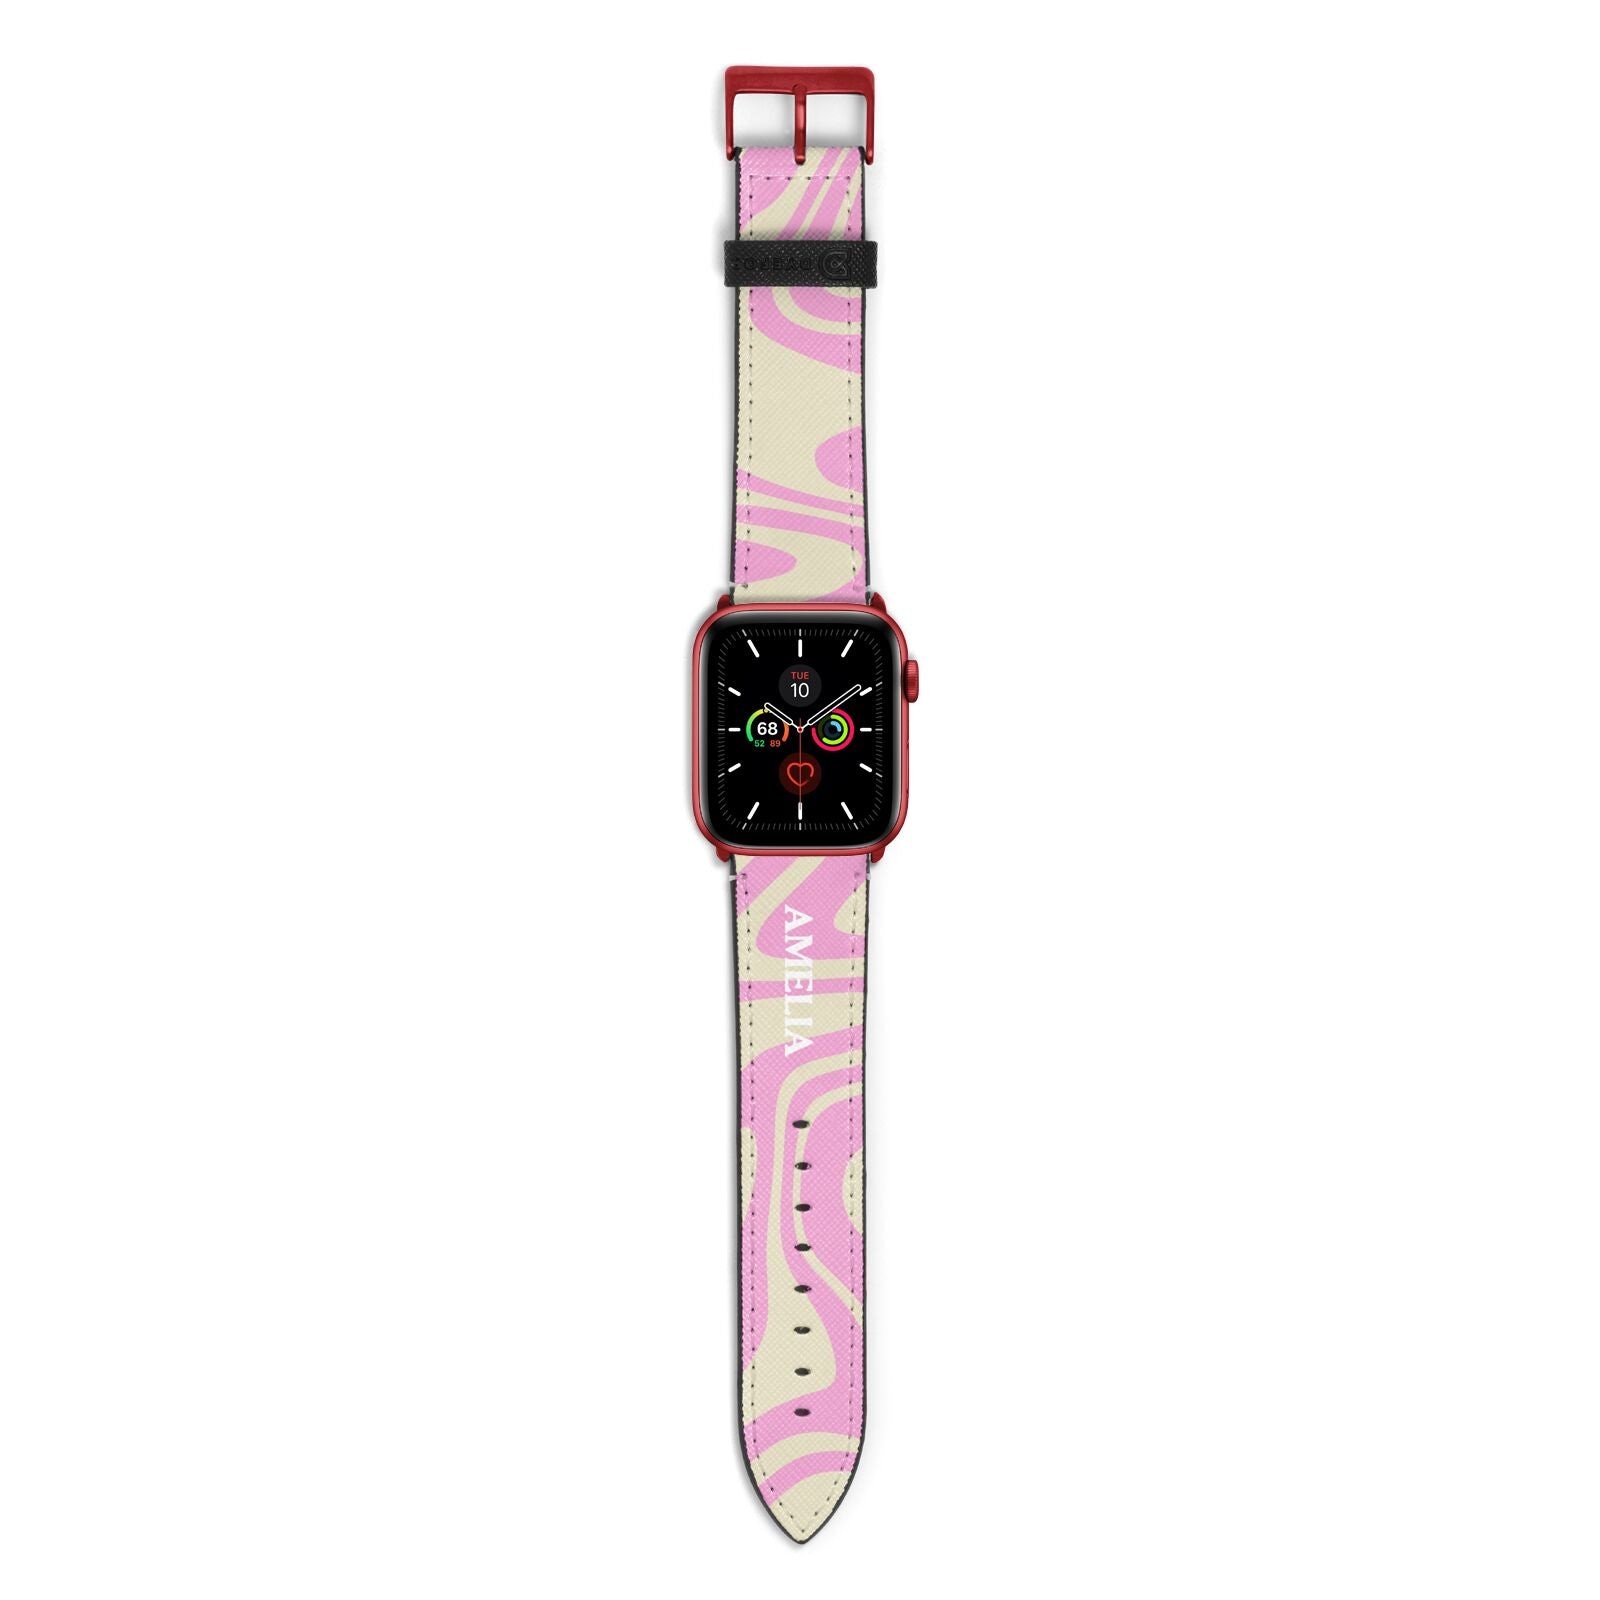 Custom Seventies Apple Watch Strap with Red Hardware